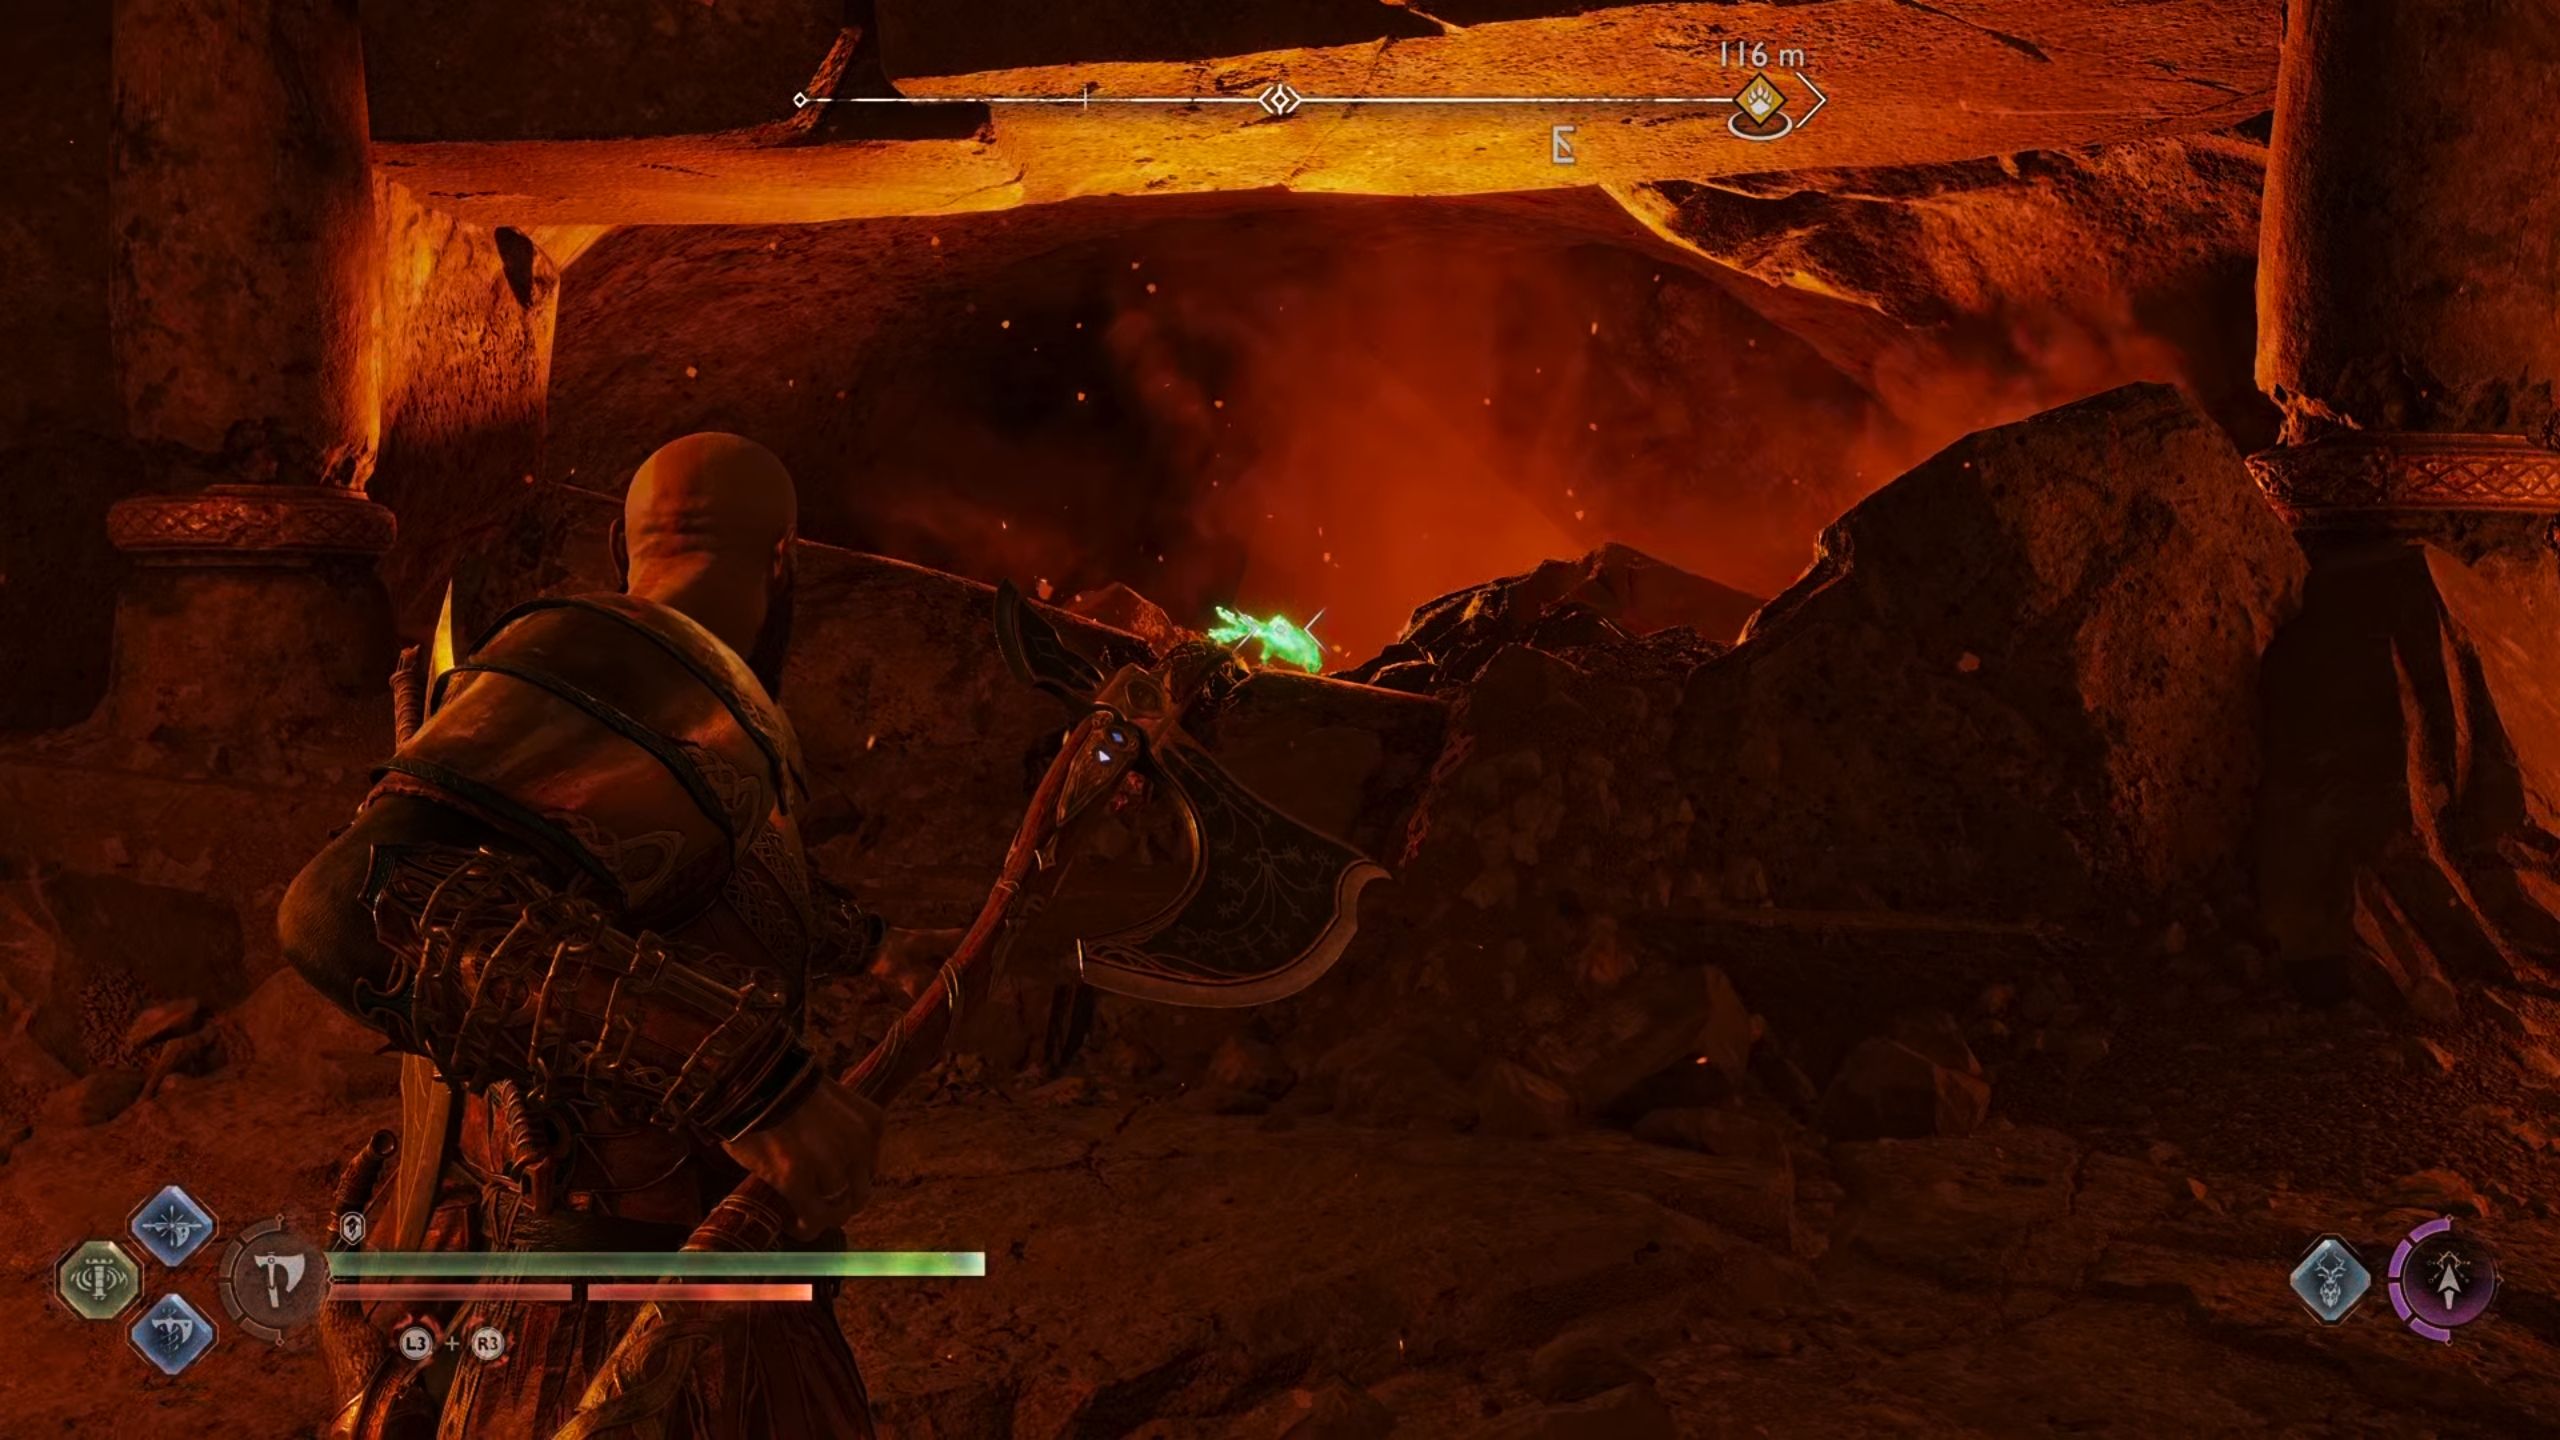 You can see the Odin's Raven in the same cave where you found the Legendary Chest.